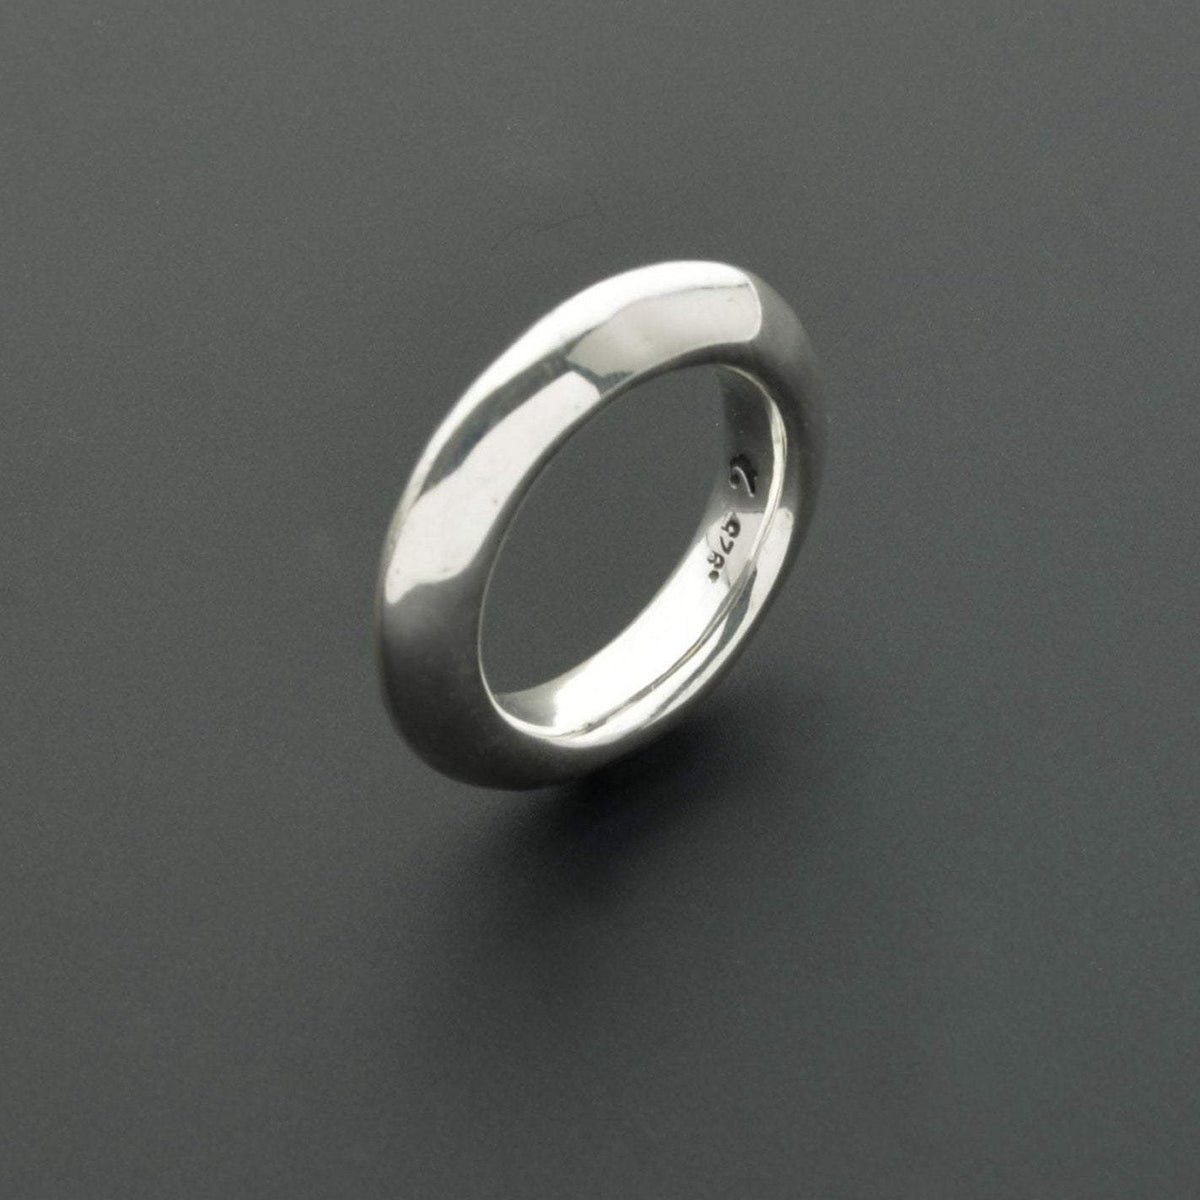 Smooth disk silver ring